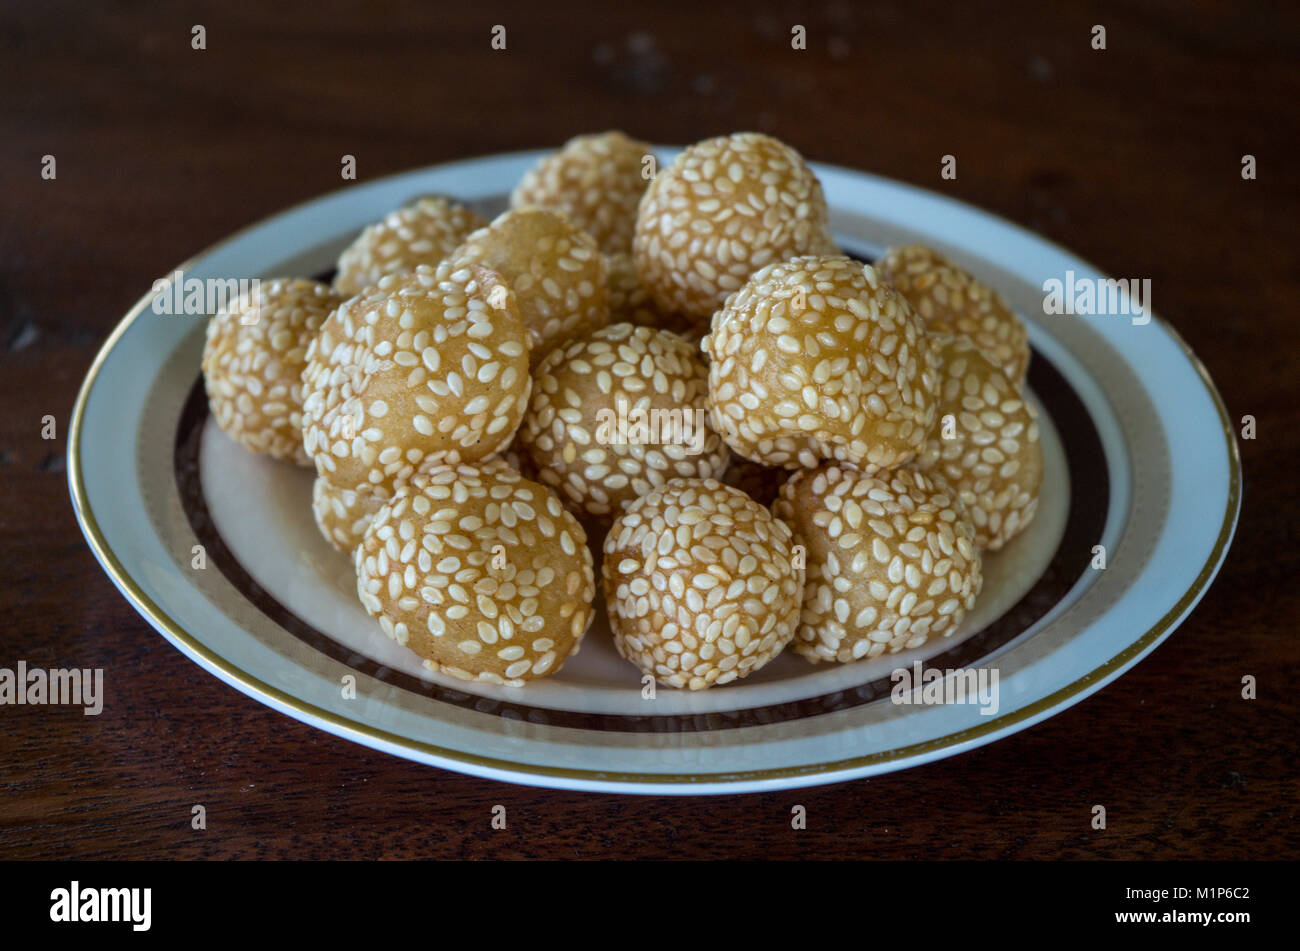 Delicious onde-onde pastry snack in Indonesia on plate Stock Photo